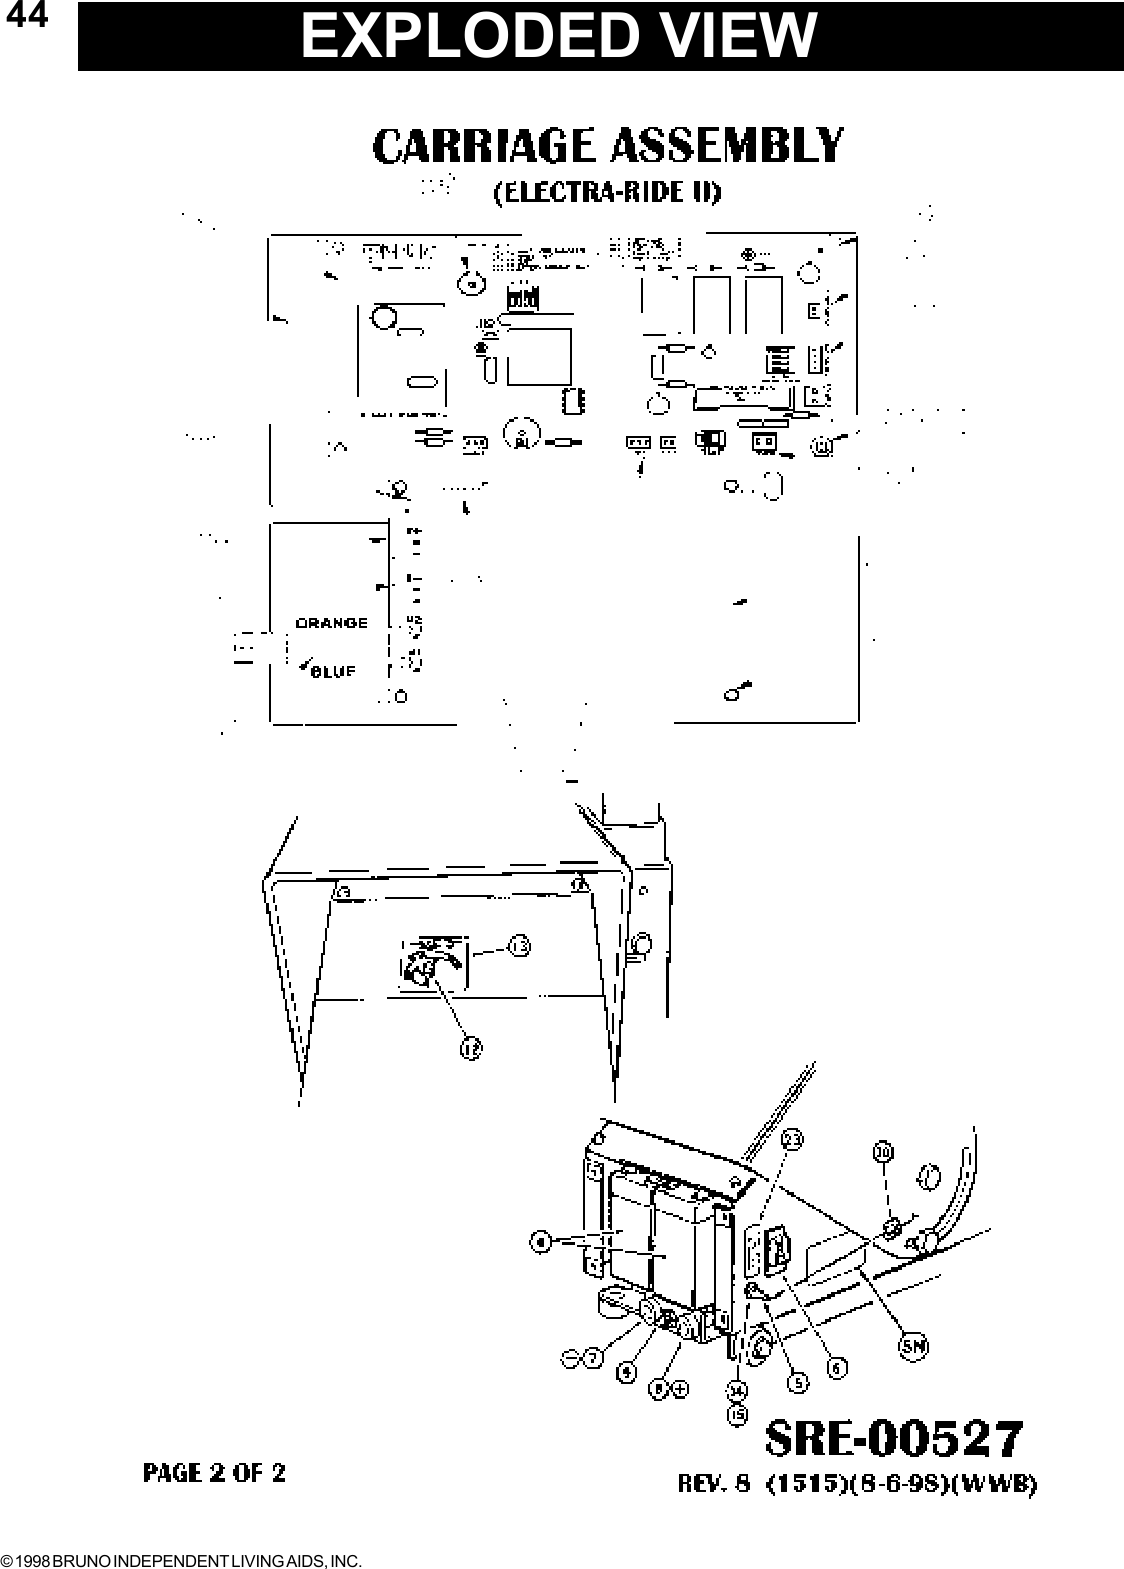 © 1998 BRUNO INDEPENDENT LIVING AIDS, INC.44 EXPLODED VIEW